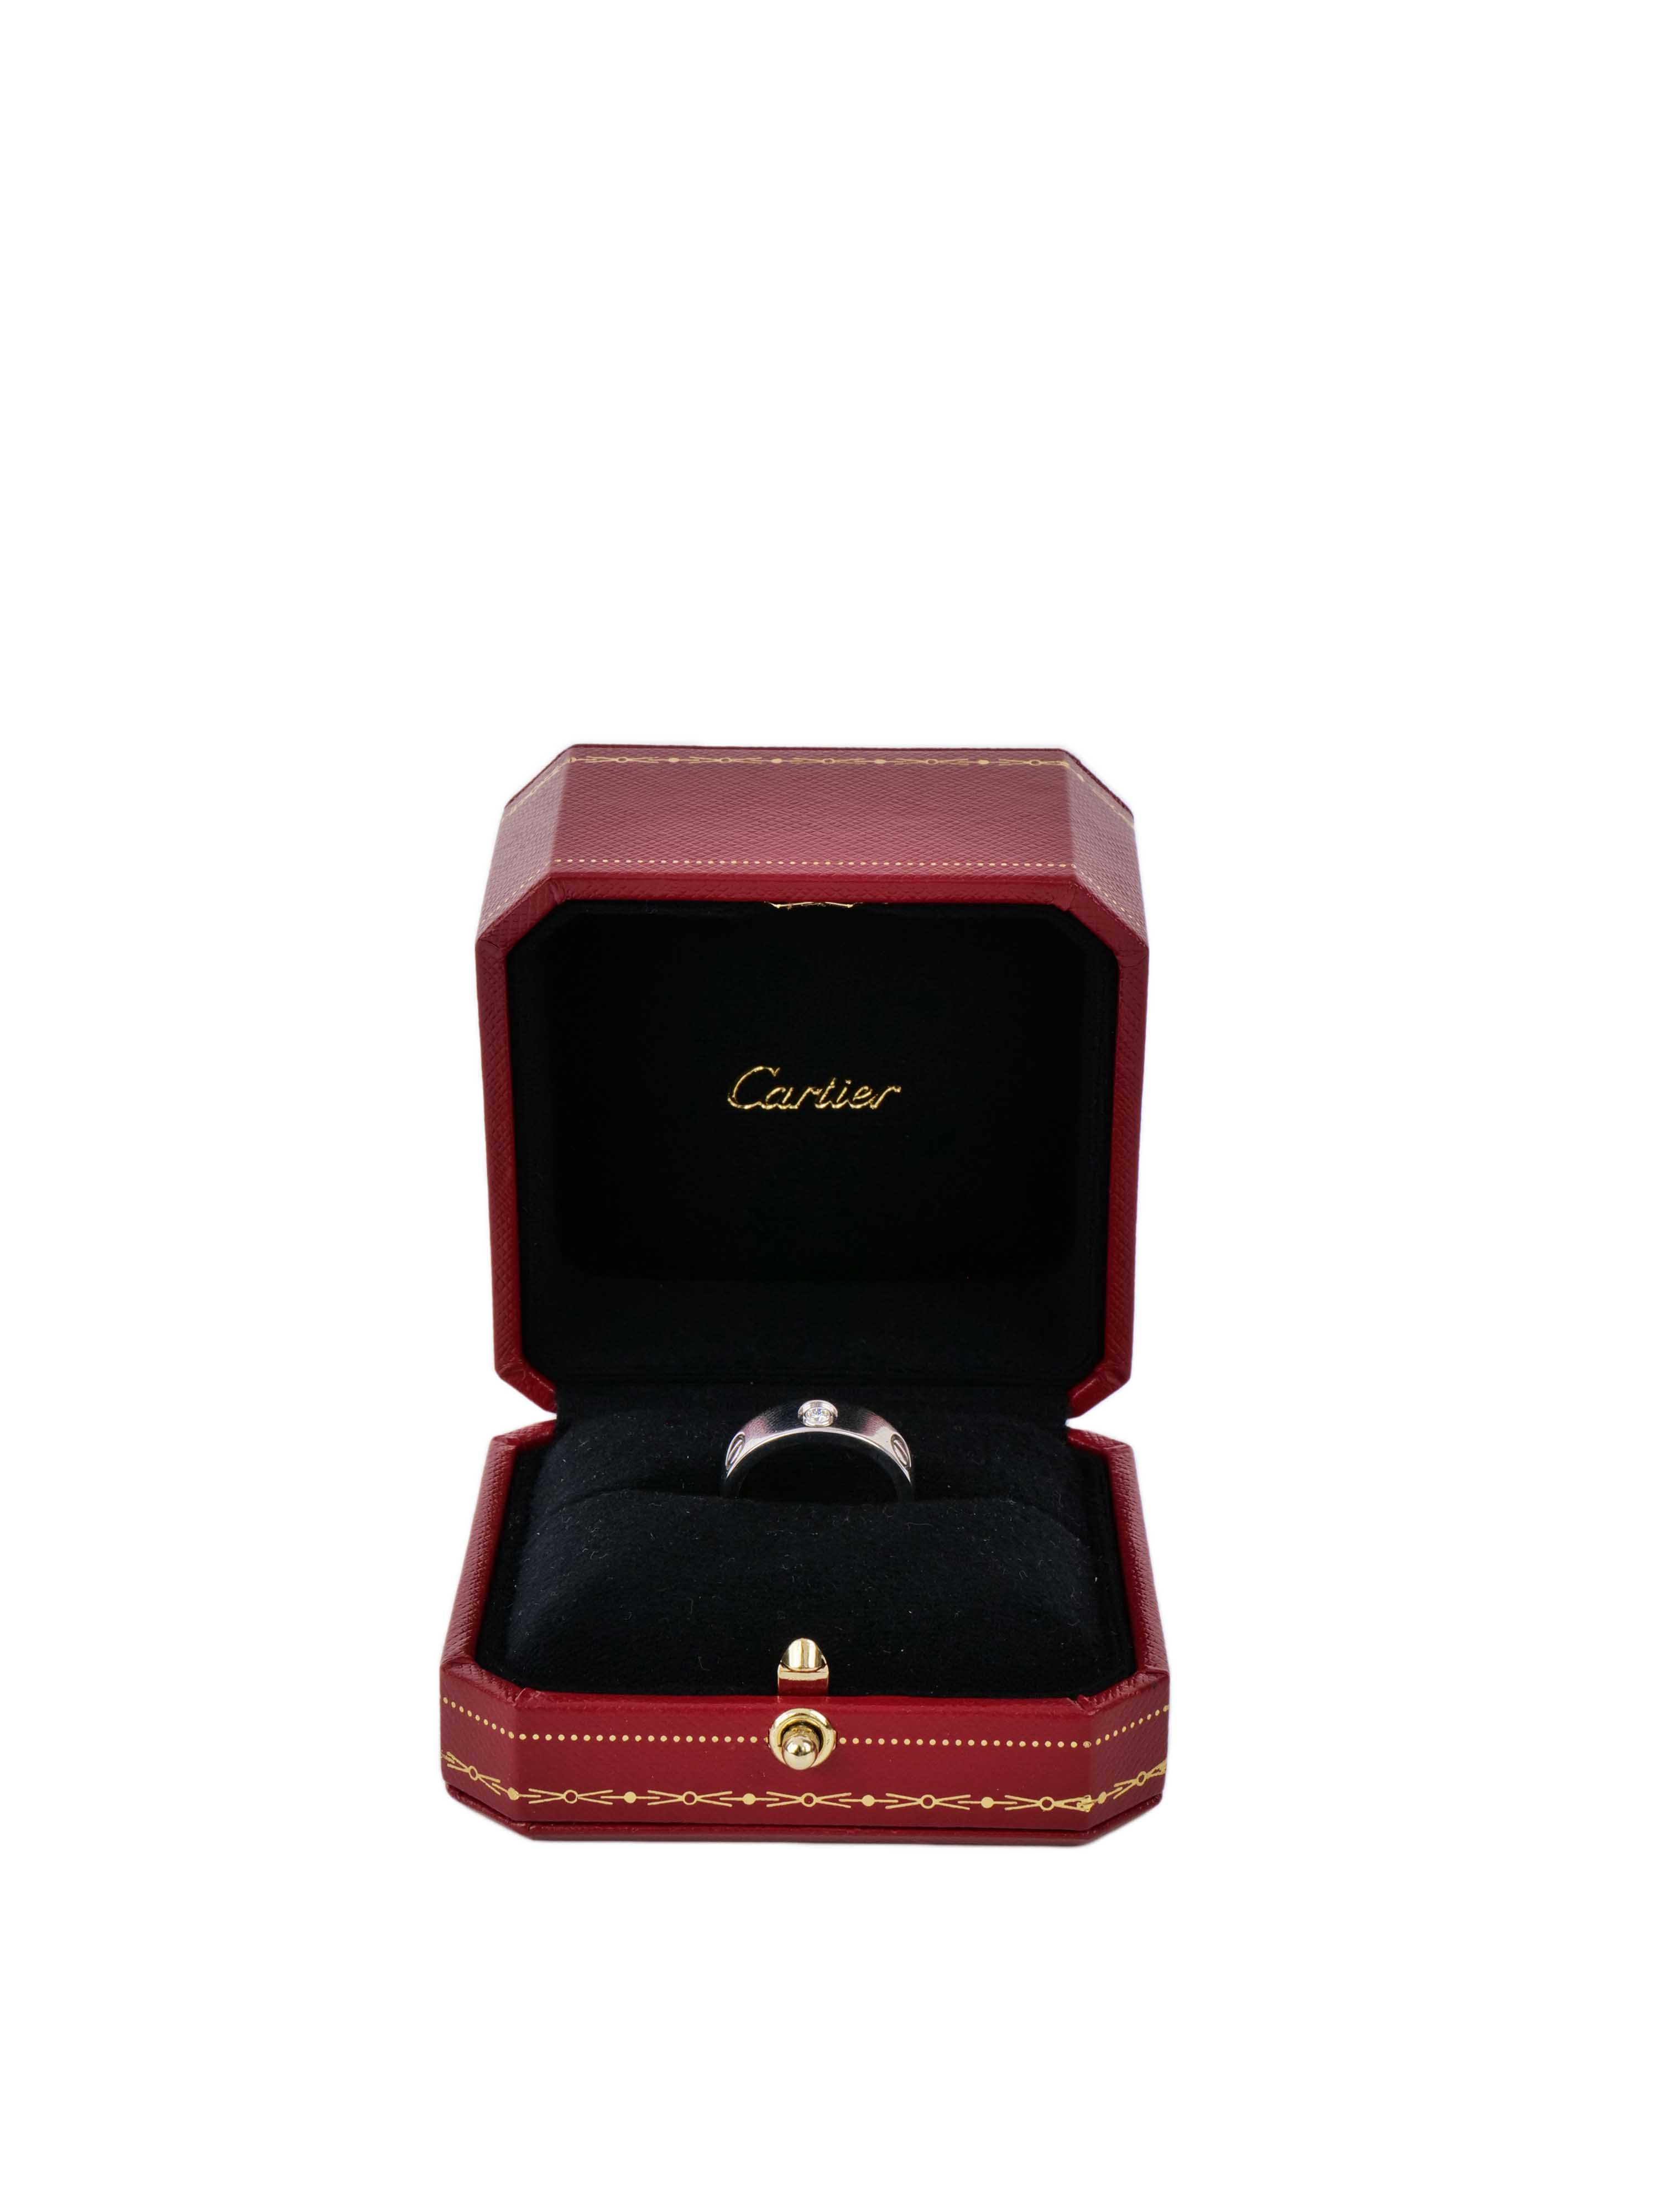 Cartier 18K White Gold Love Ring with 3 Diamonds.